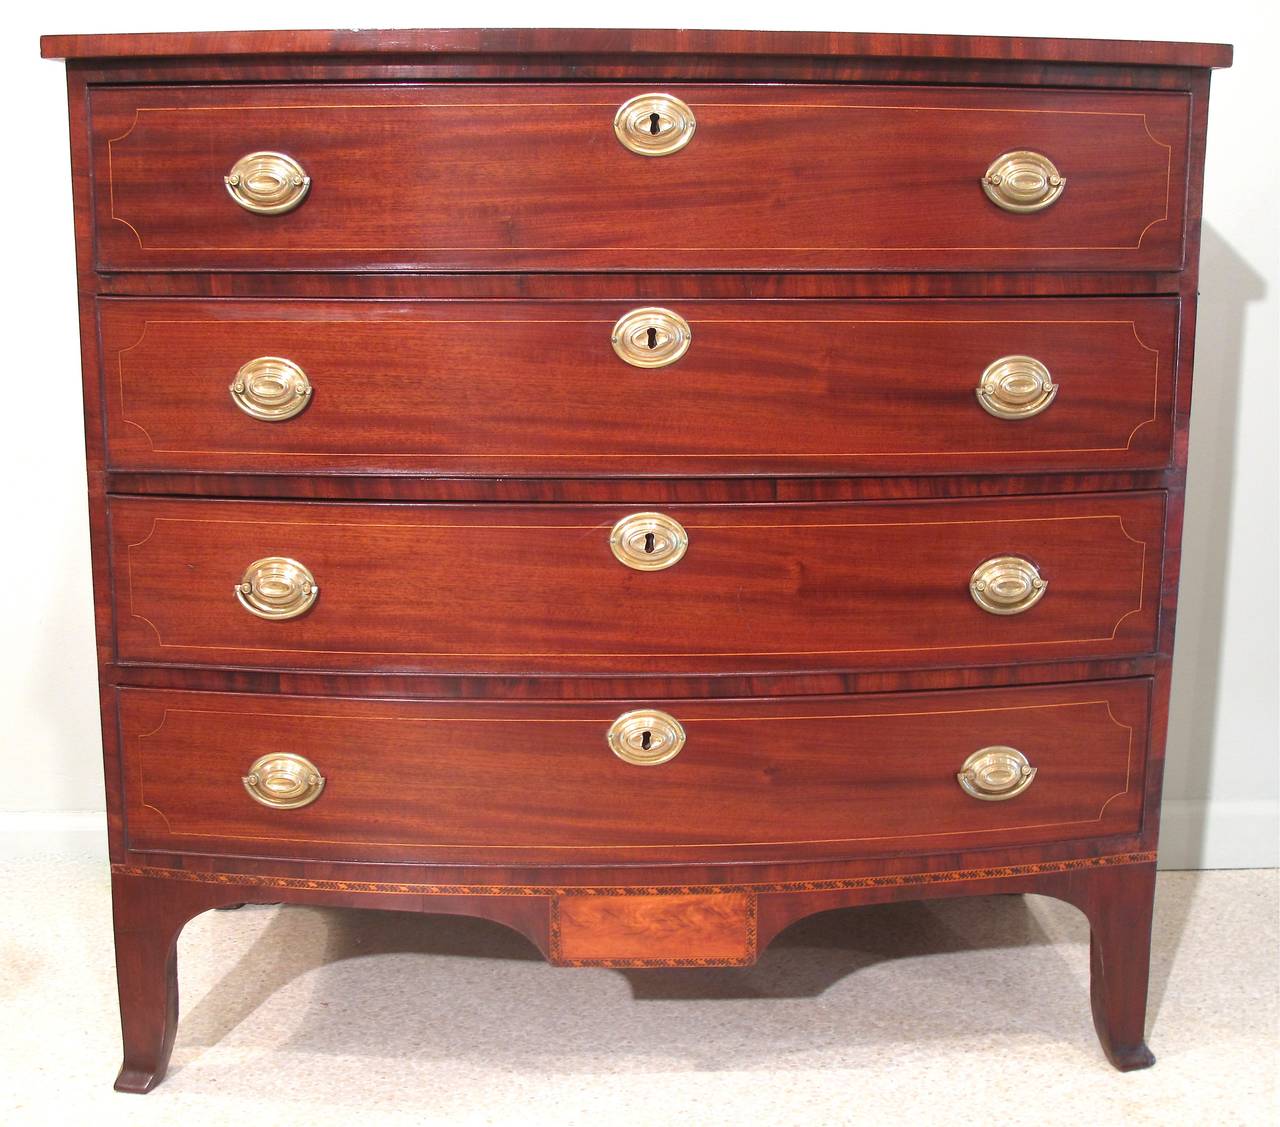 An elegant bow front four drawer chest, ca. 1800-1810 on tall French feet and with the dropped panel apron and flame birch inset and detailed inlaid banding typical of Portsmouth, NH. Drawer fronts are mahogany with satinwood string inlay. Top and